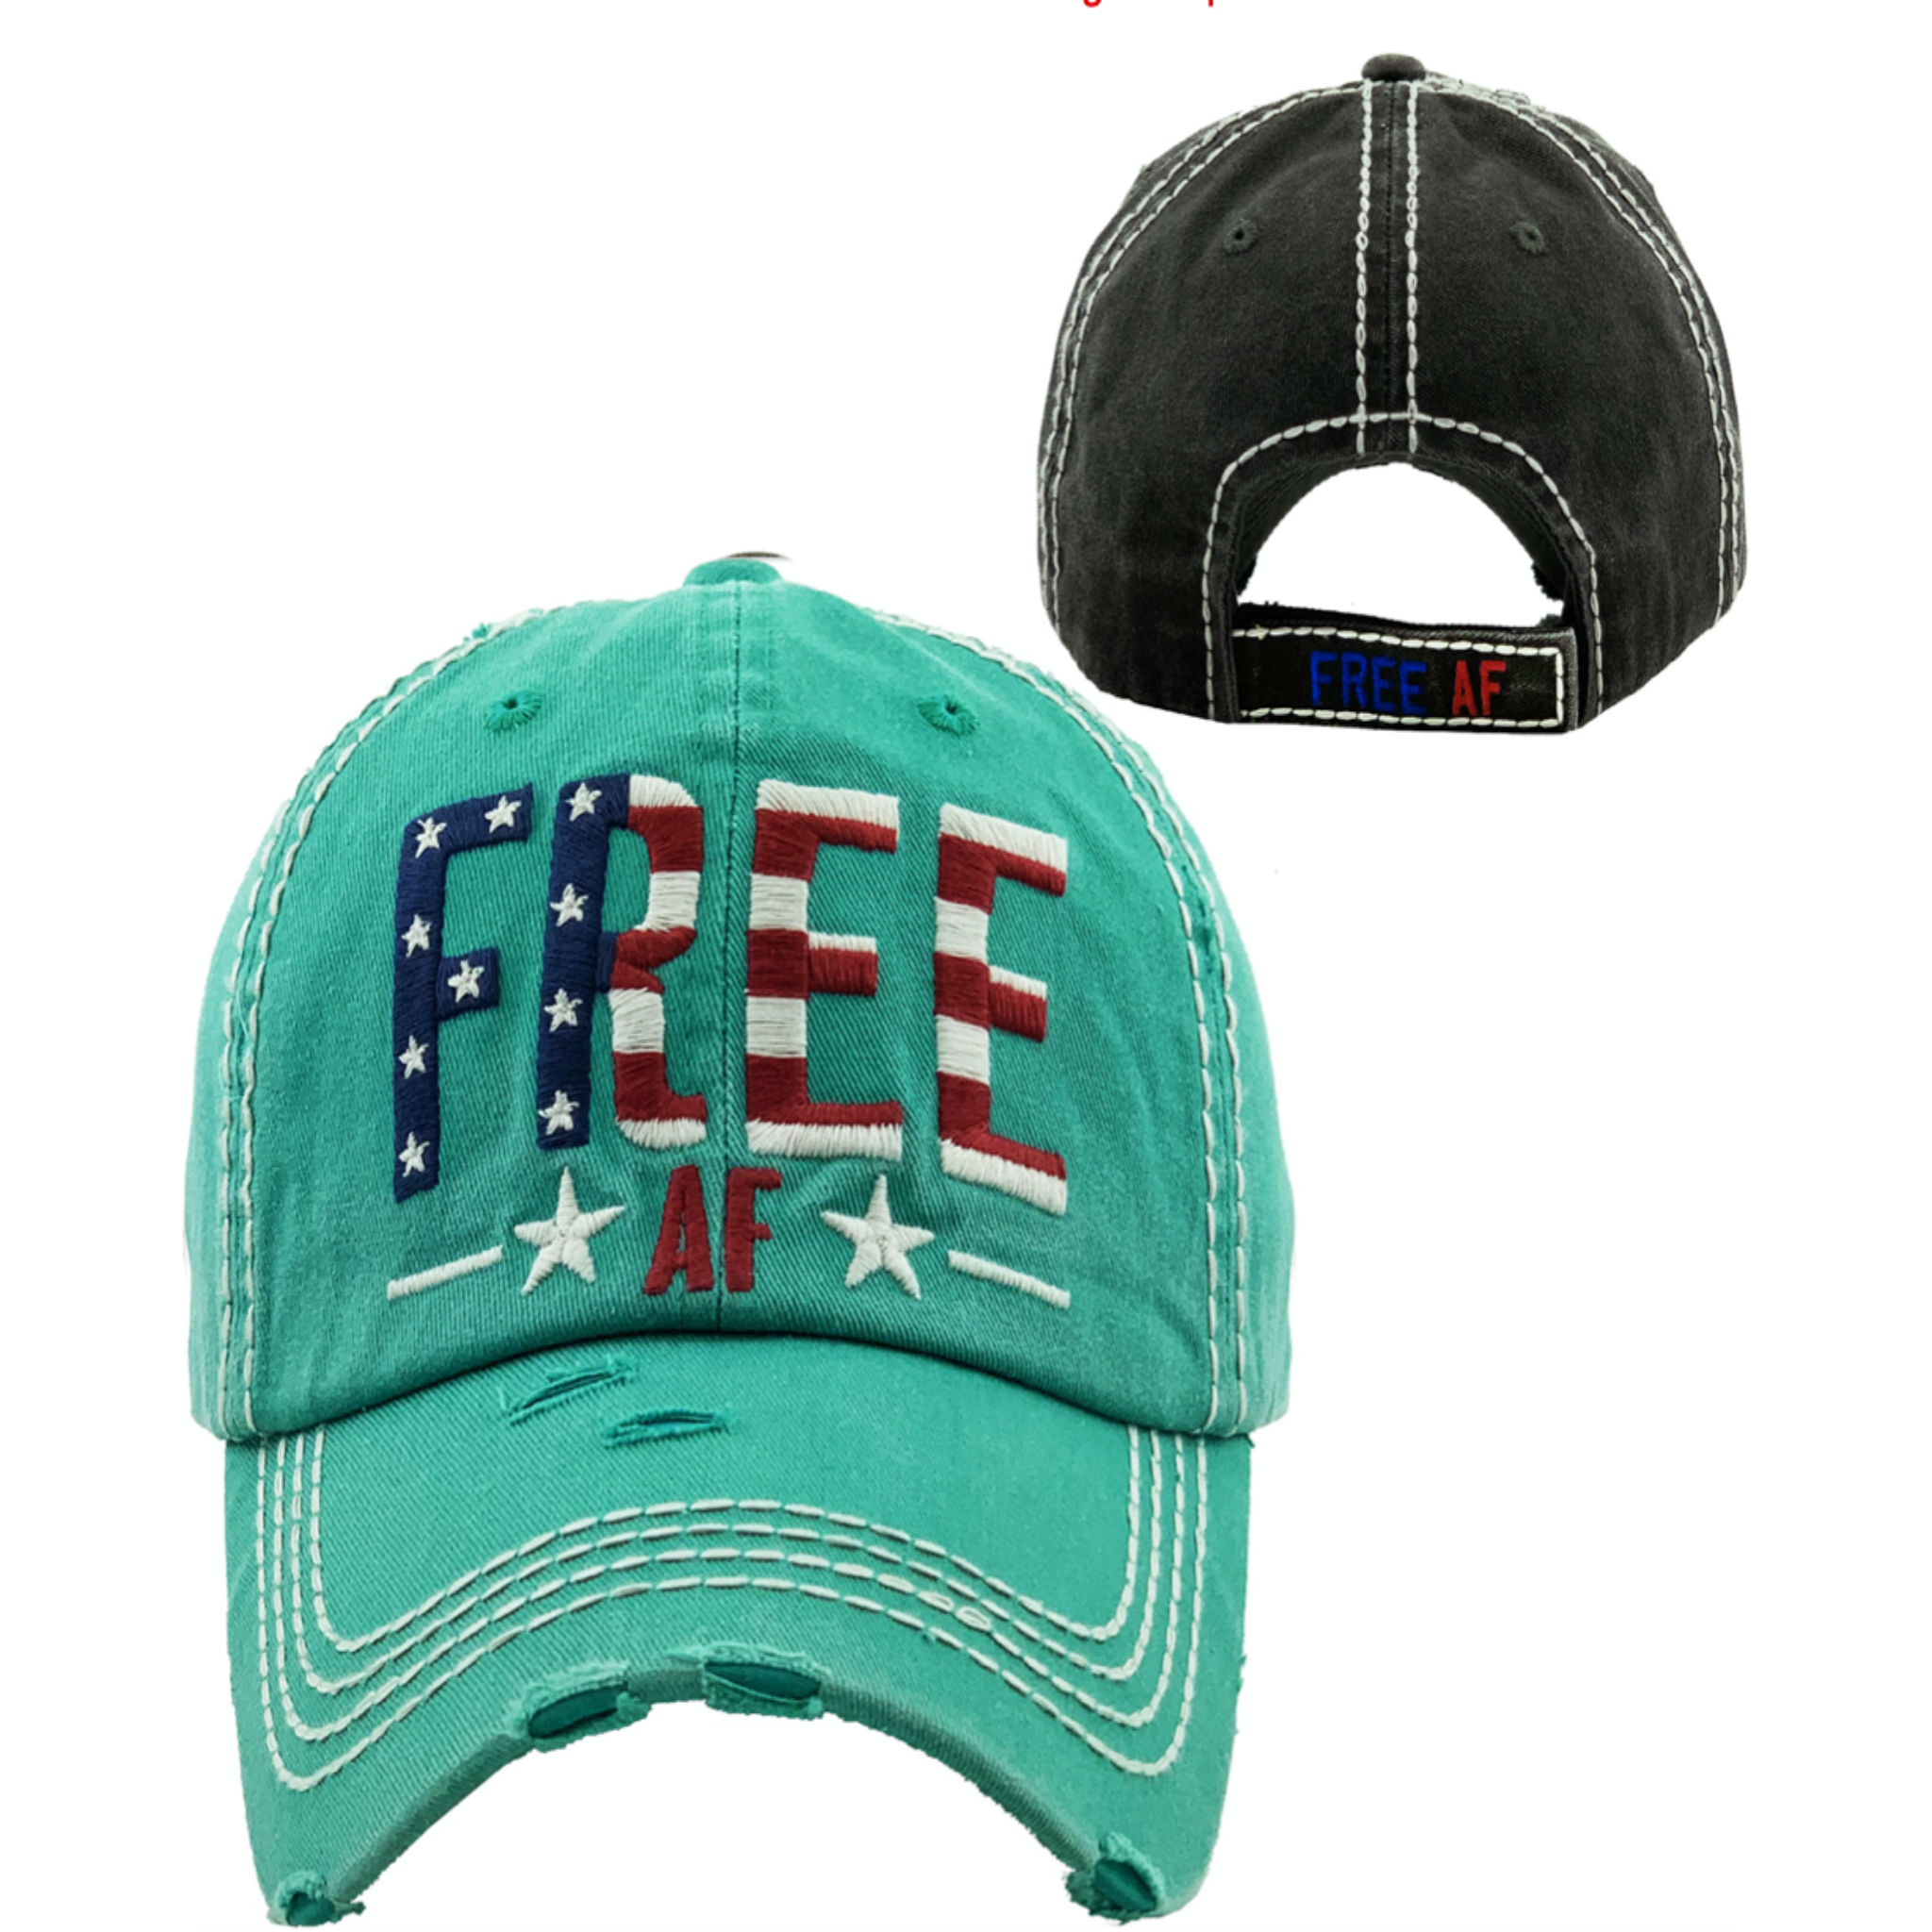 Caps and Hats